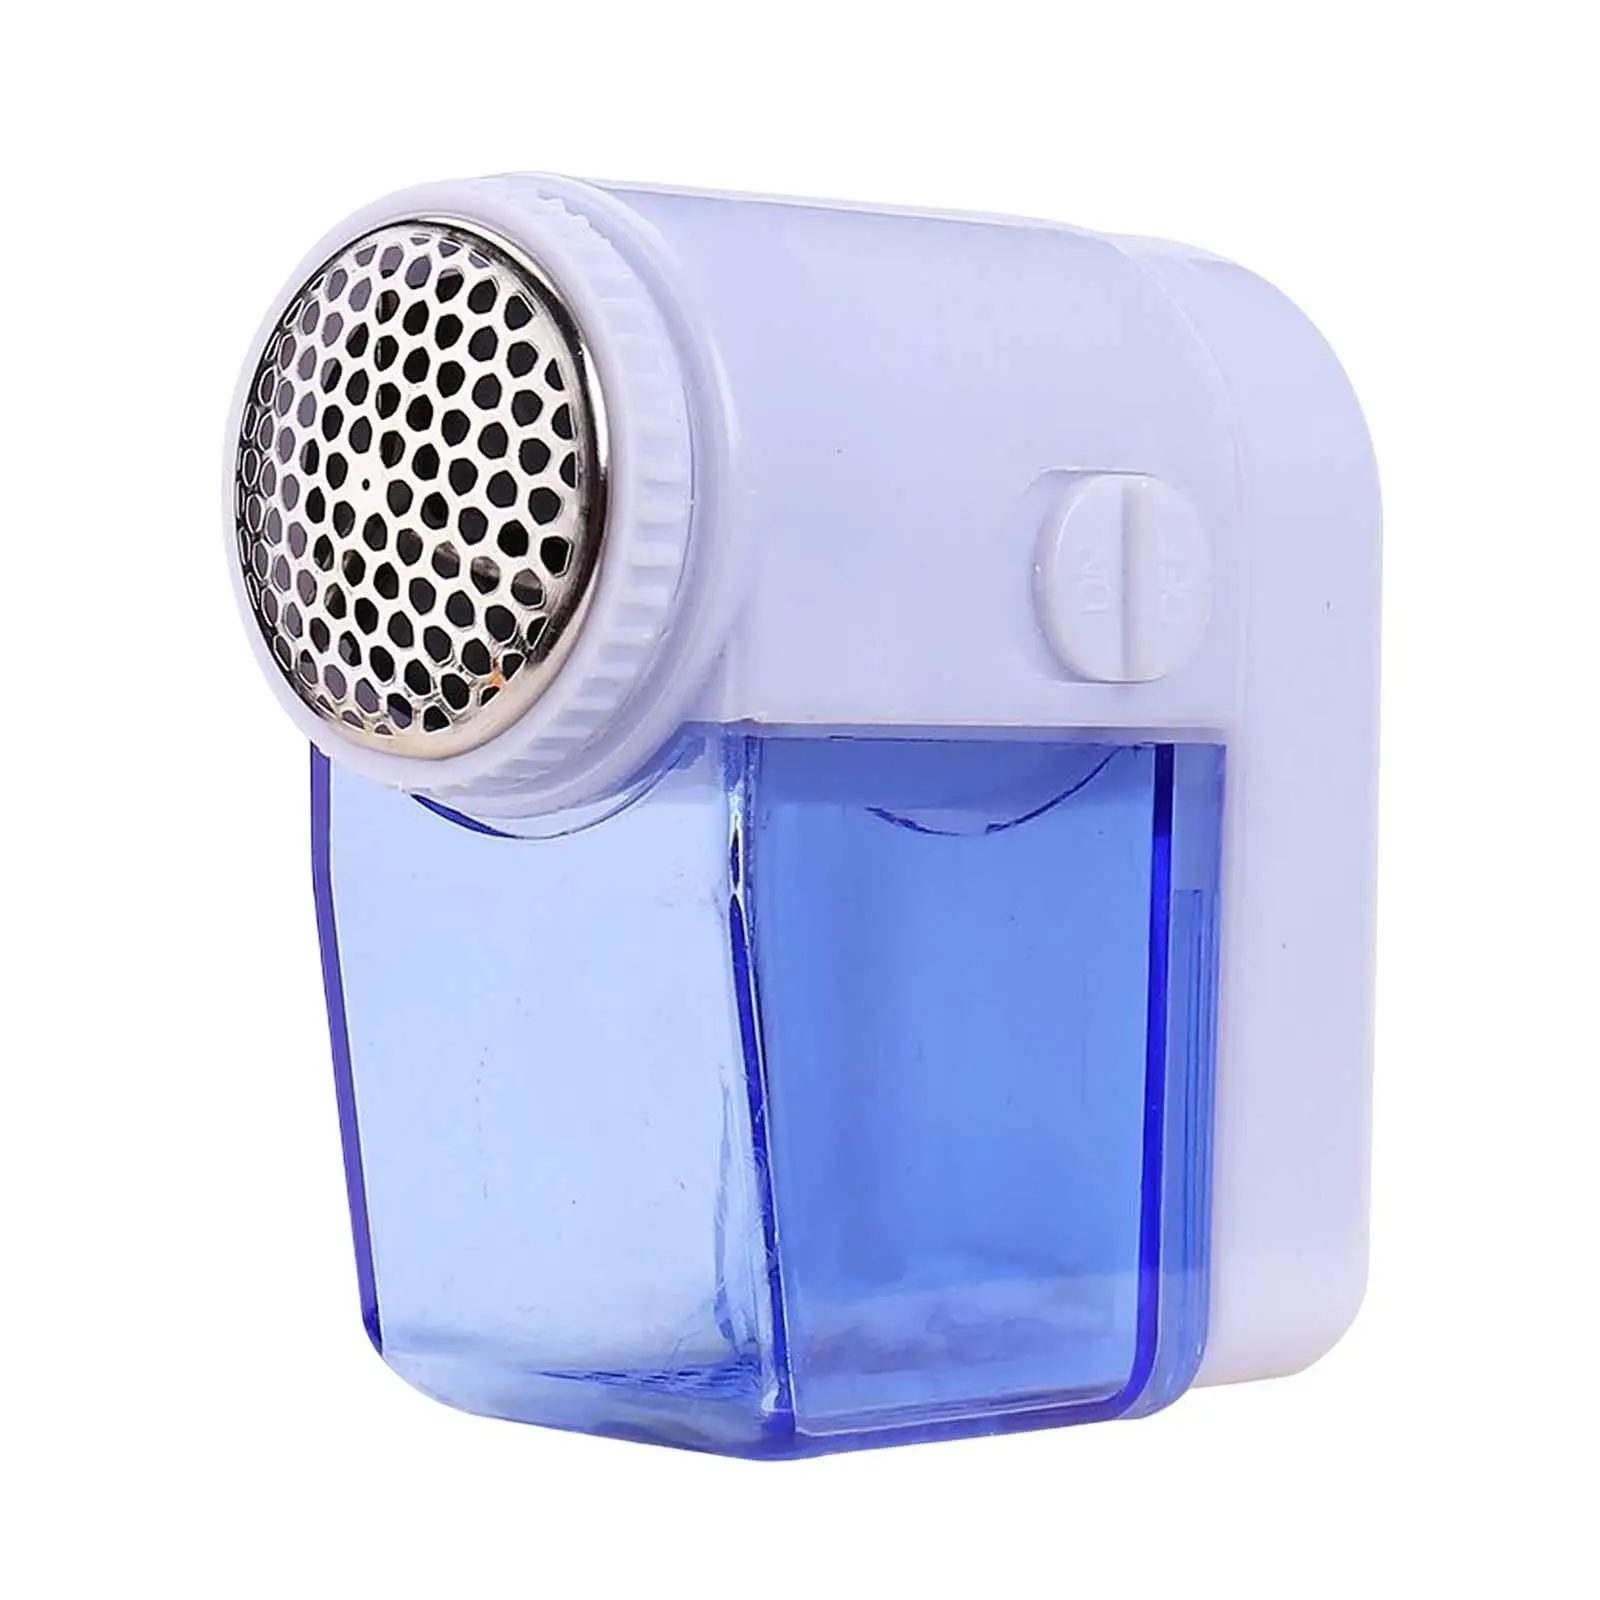 Electric Remover Honeycomb Net Remover Shaver Cut Machine Defuzzer for Bedding Clothes Wool Sweater Couch